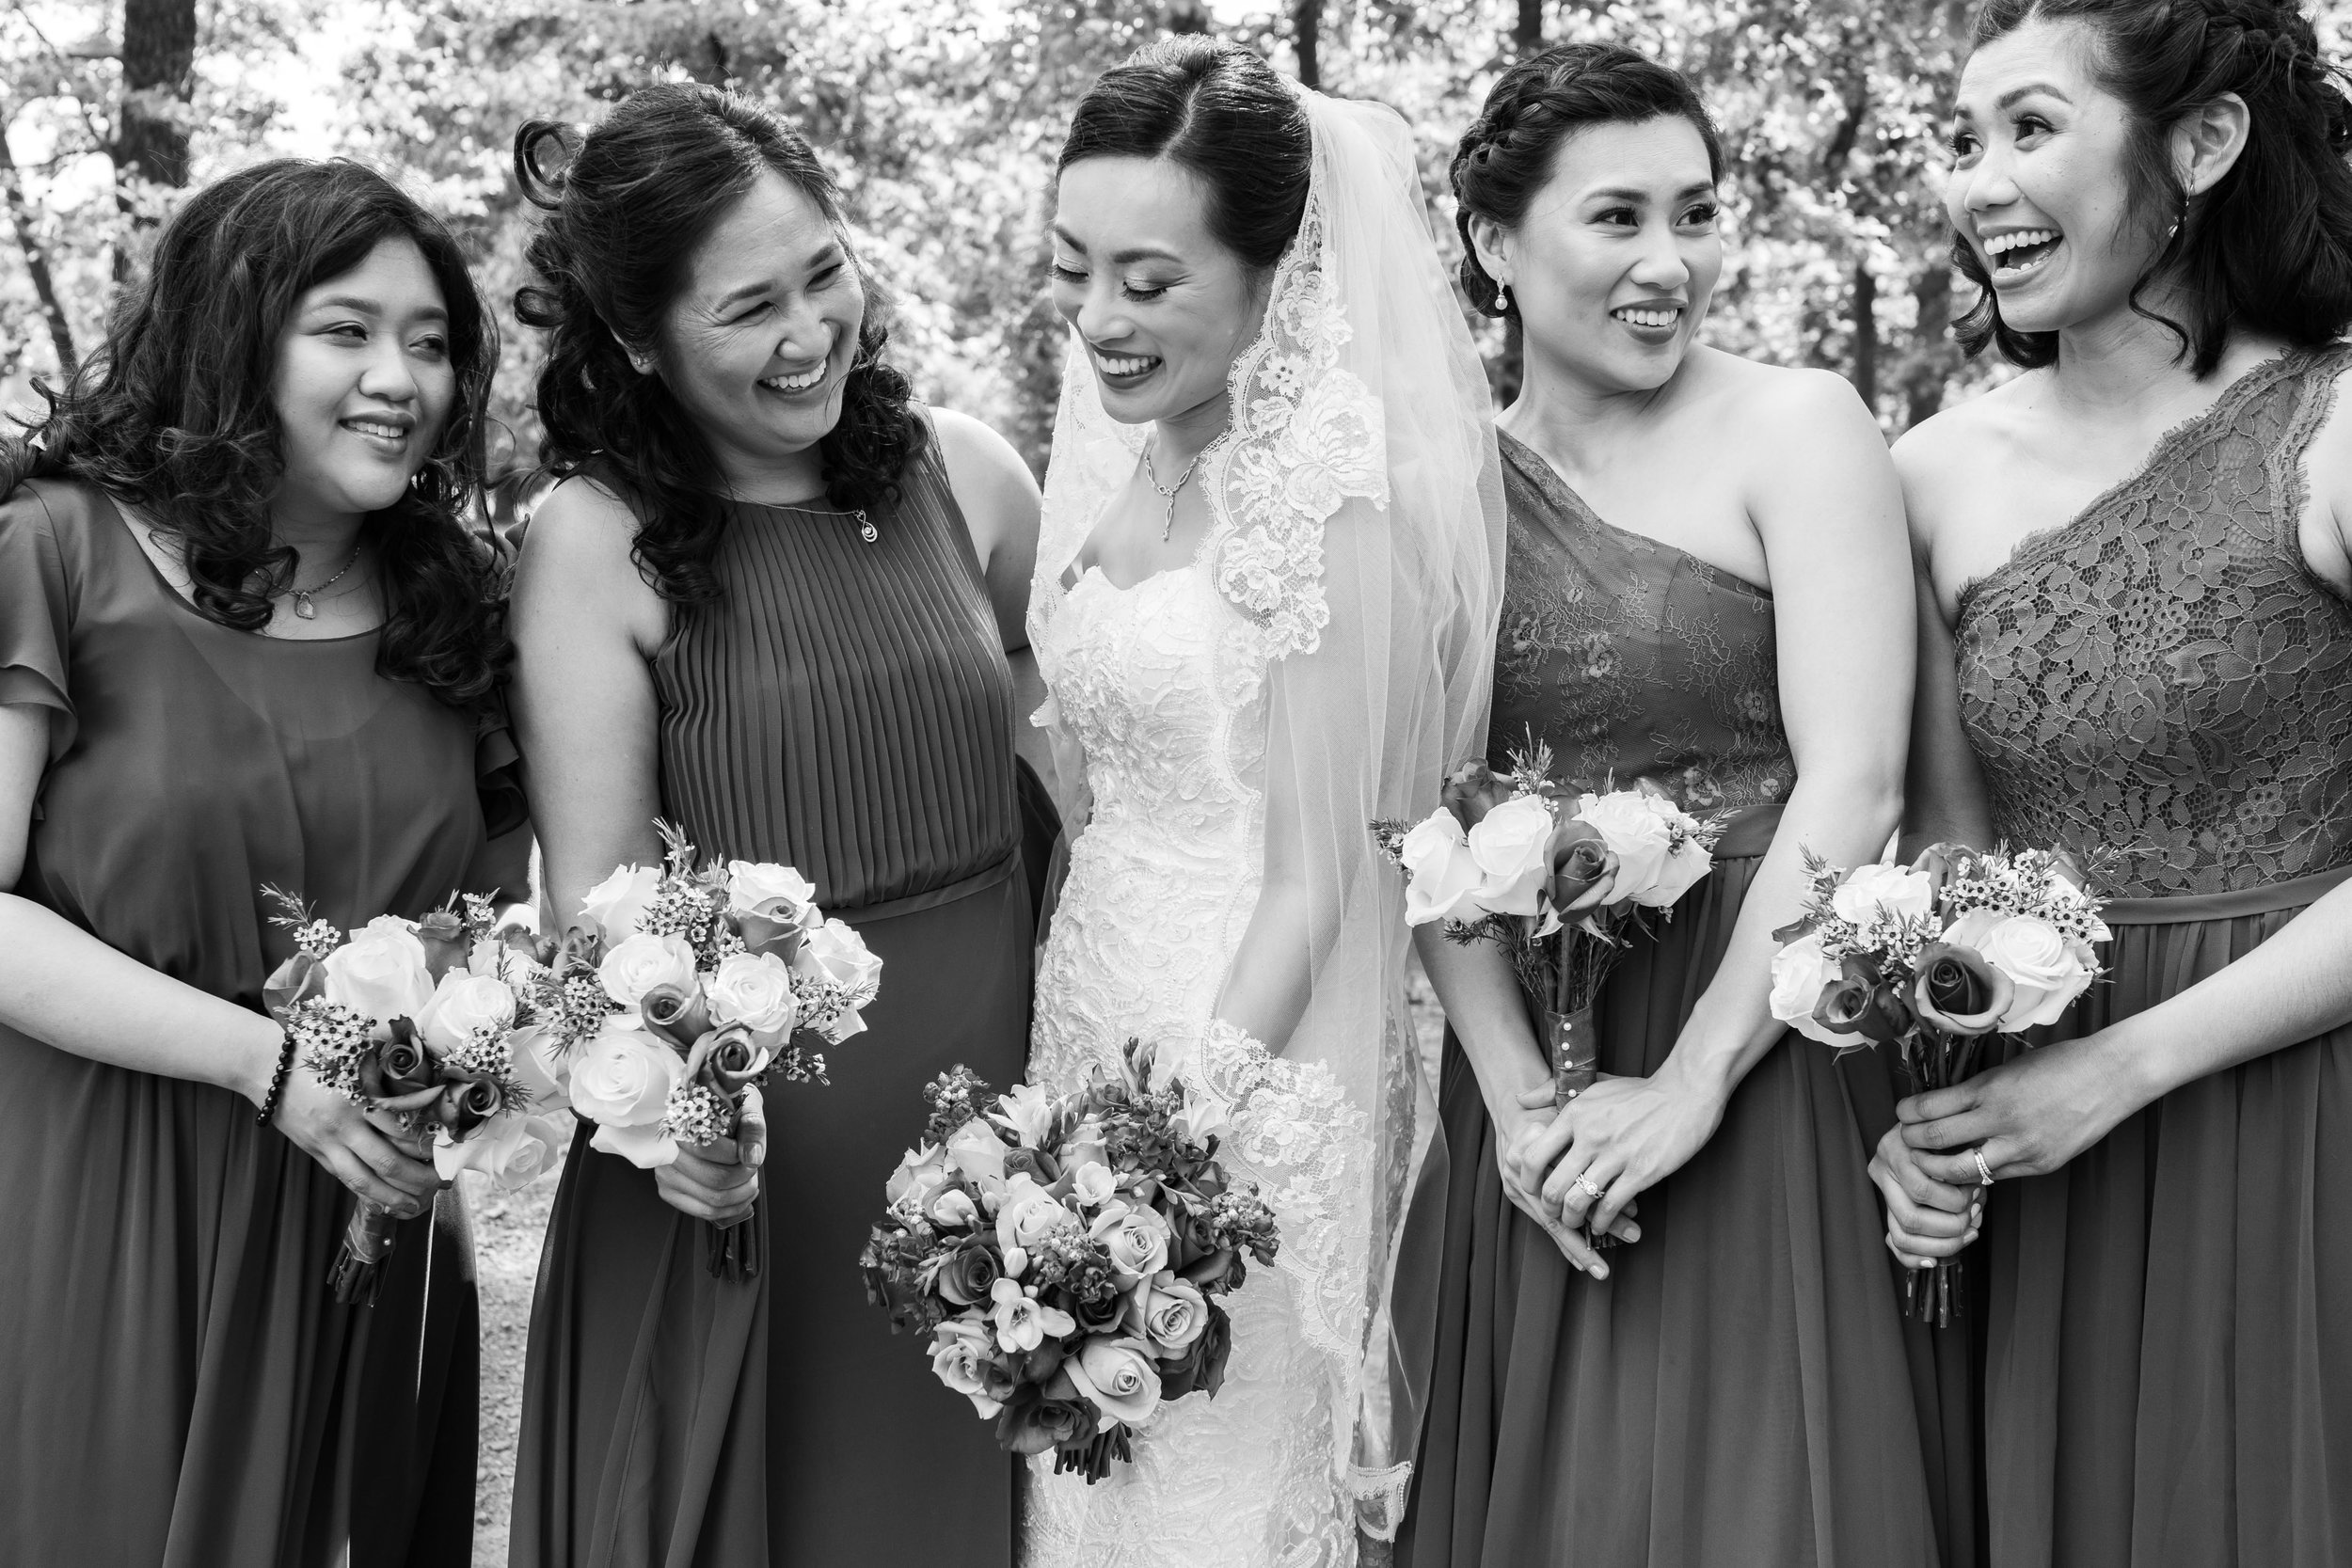 Sony a7riii wedding photography bride and bridesmaids laughing